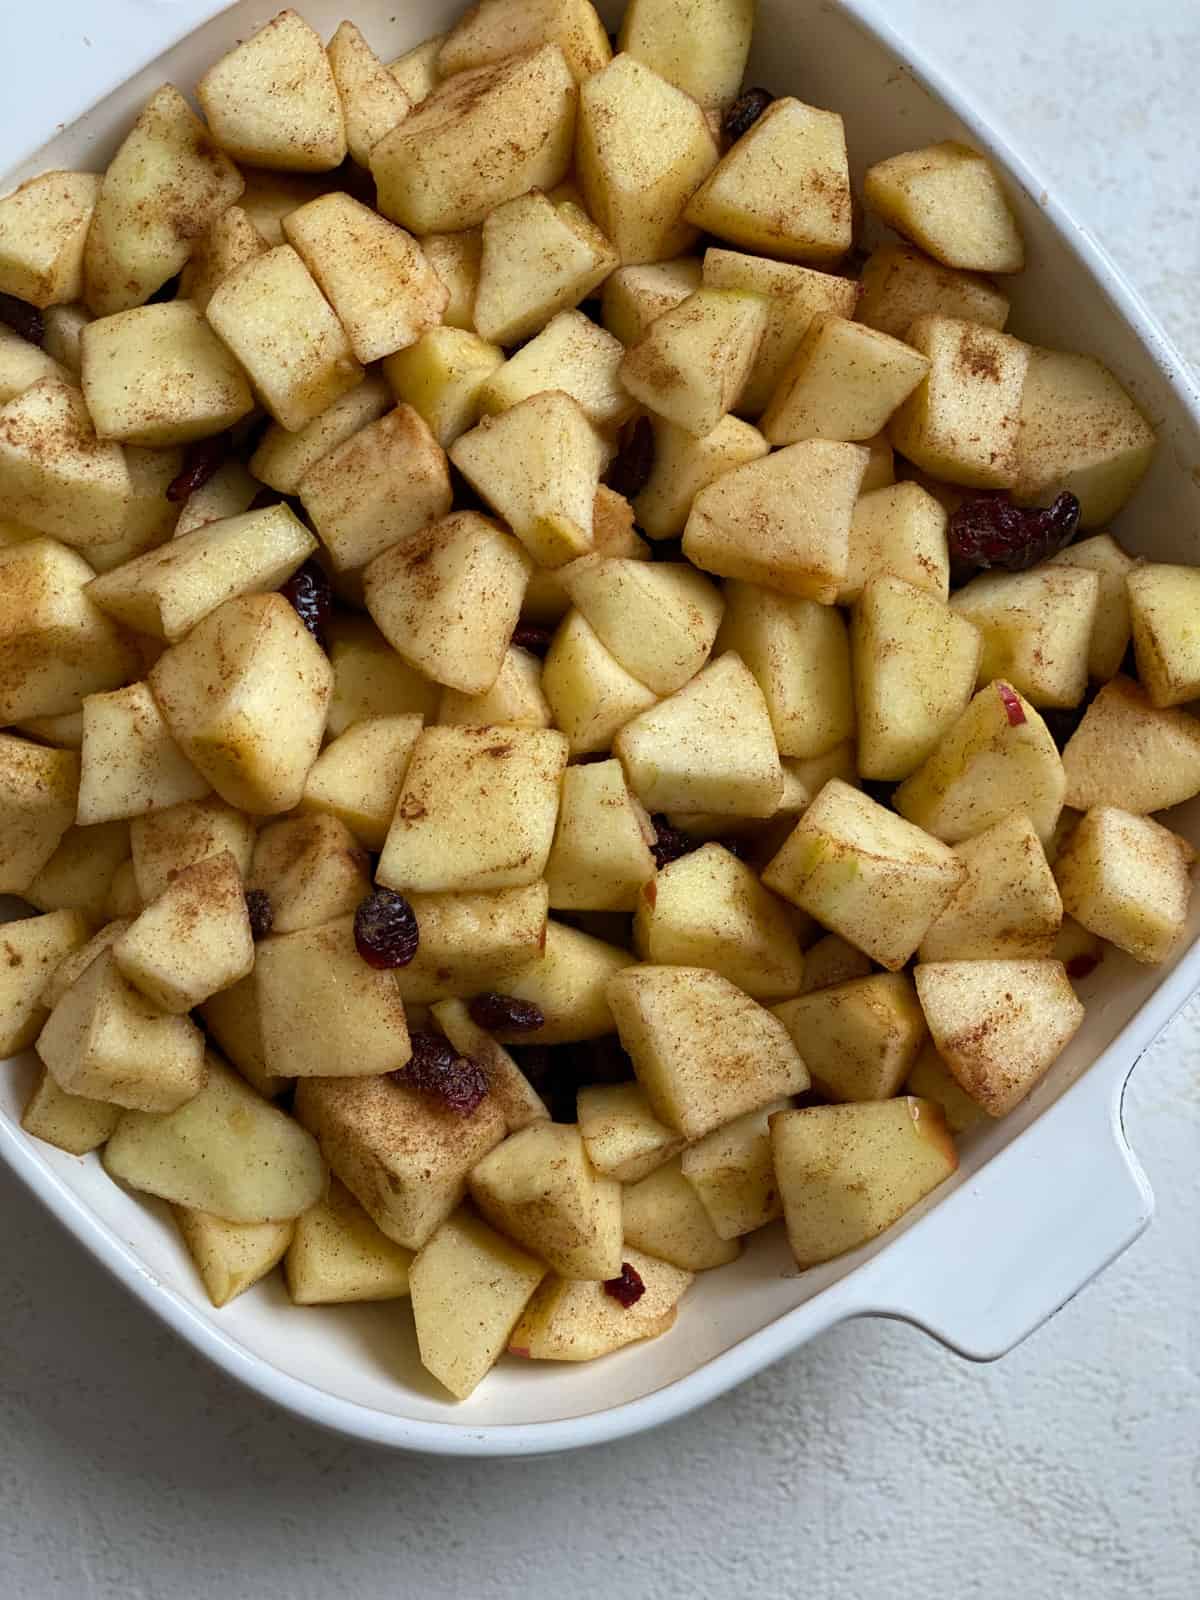 post mixing of apples and ingredients together in a bowl